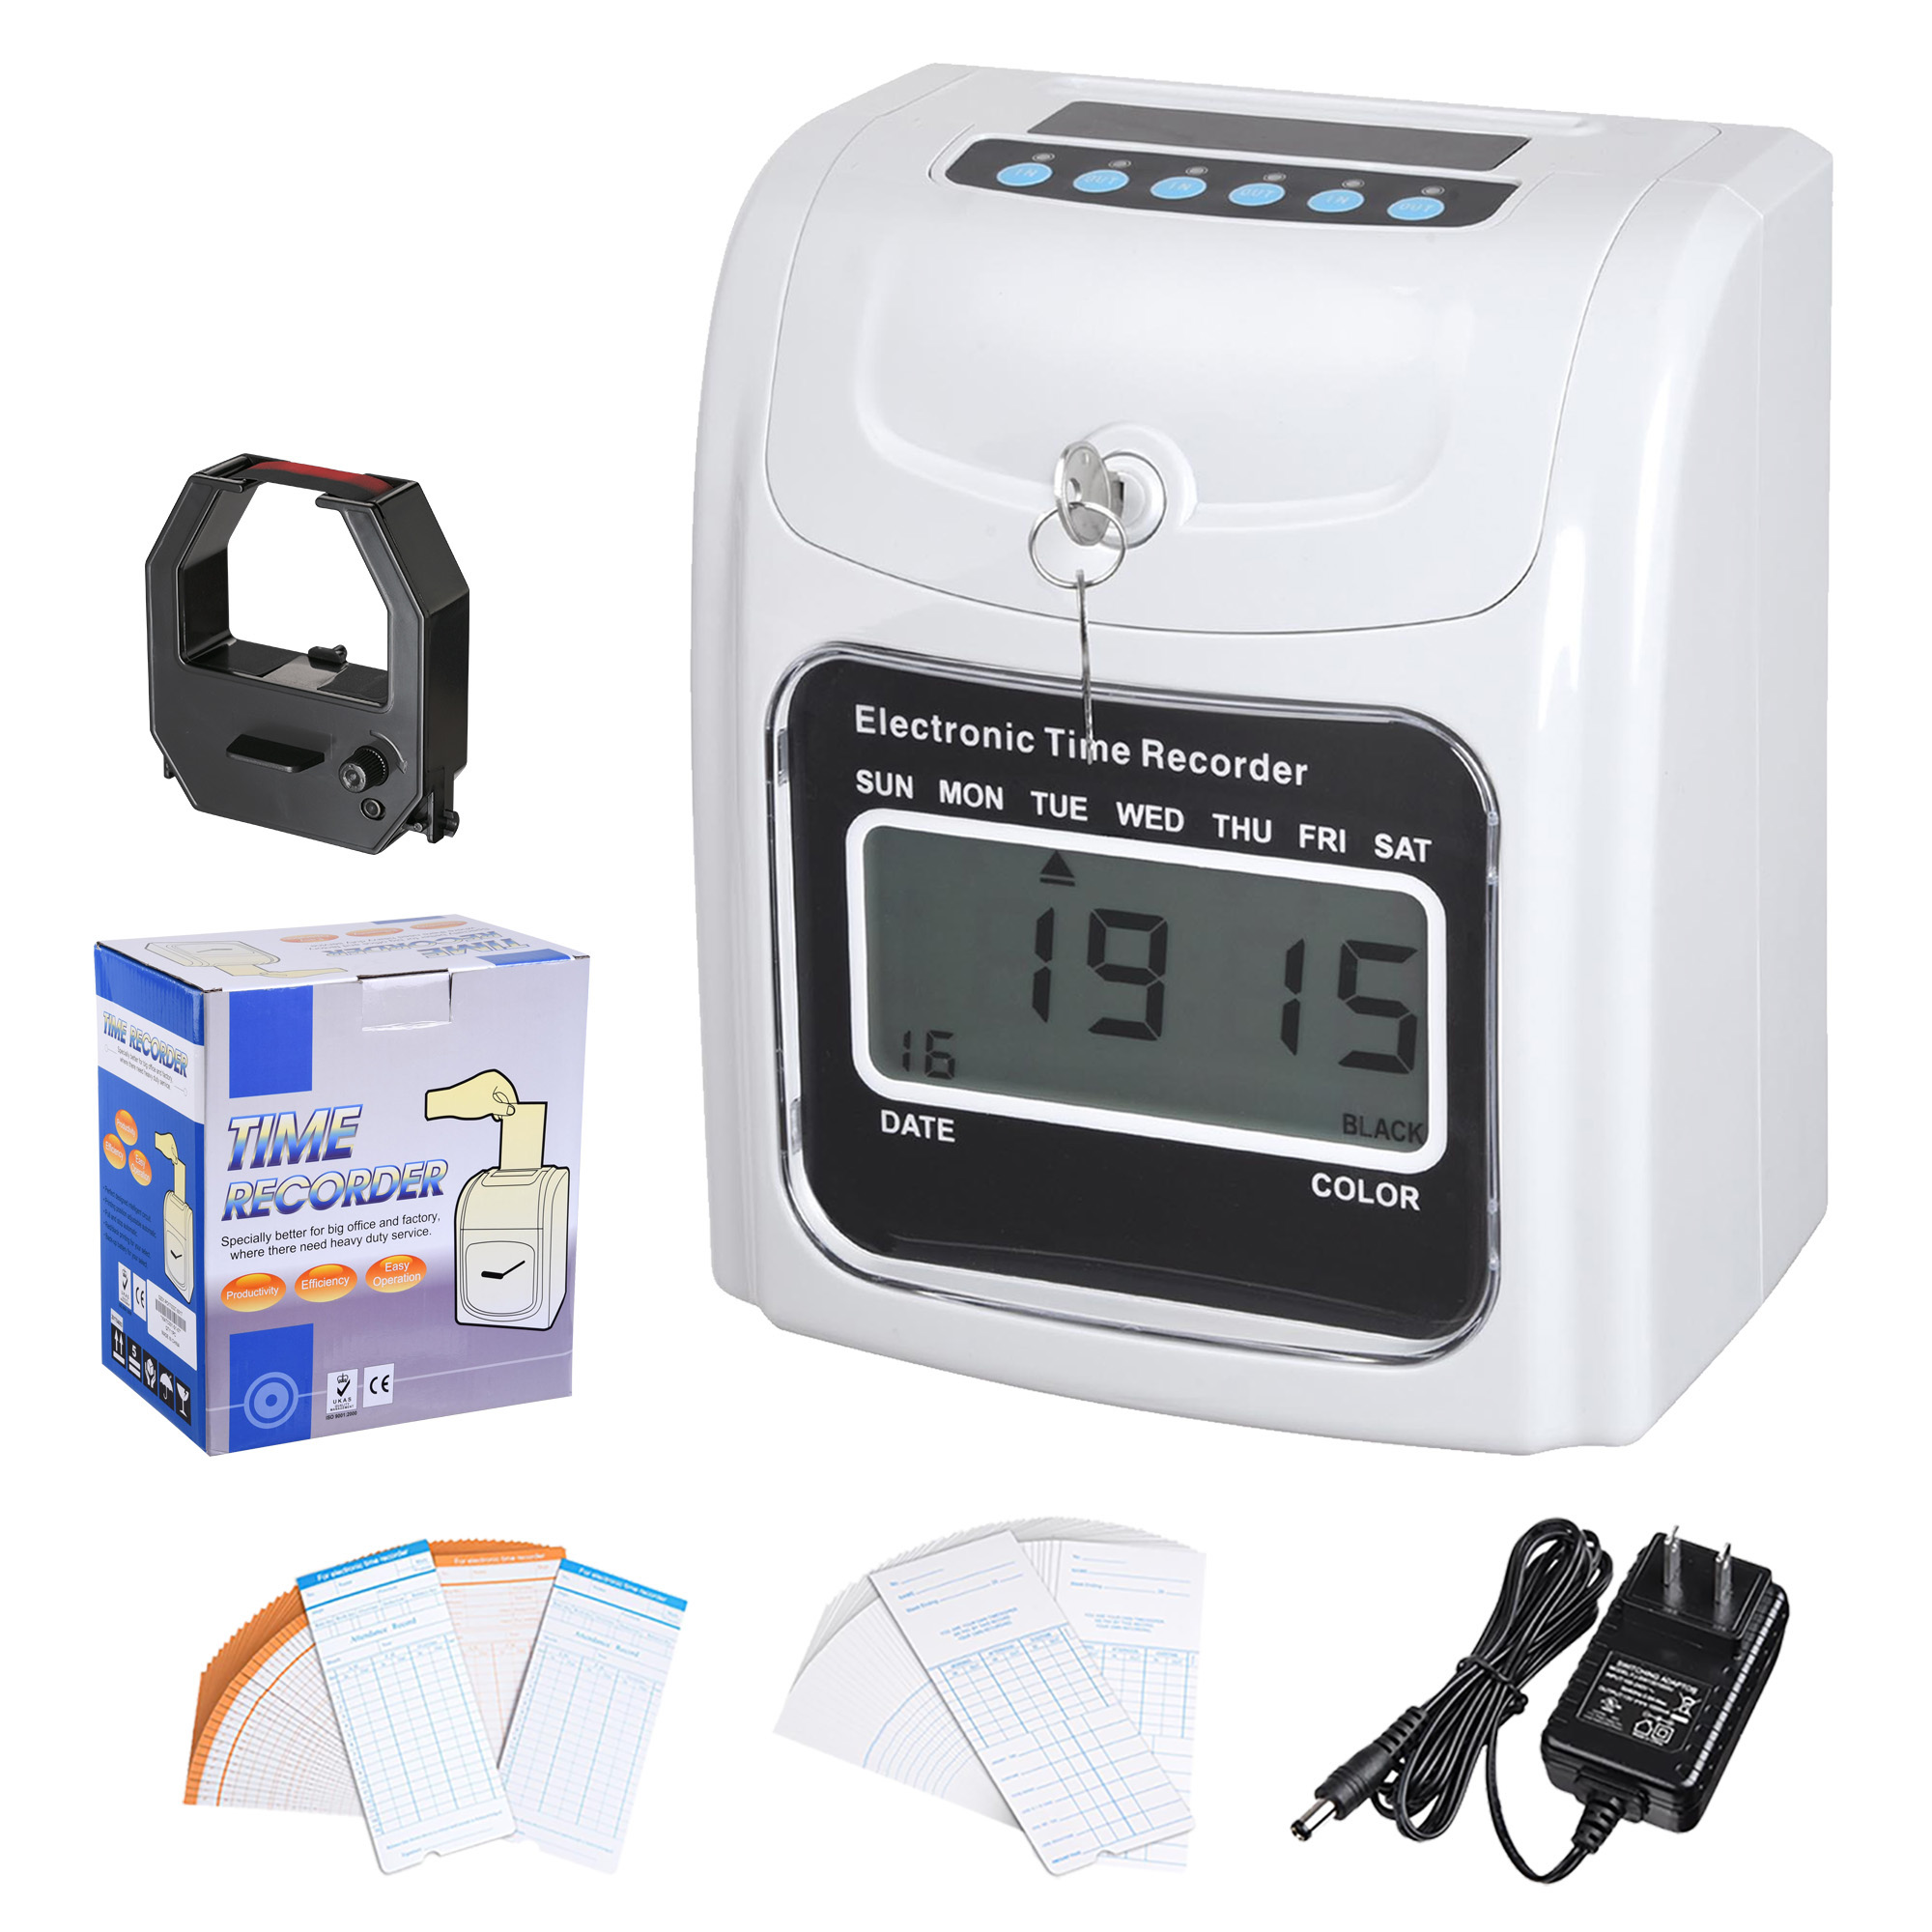 Yescom Employee Attendance Punch Time Clock Payroll Recorder LCD Display w/ 100 Cards